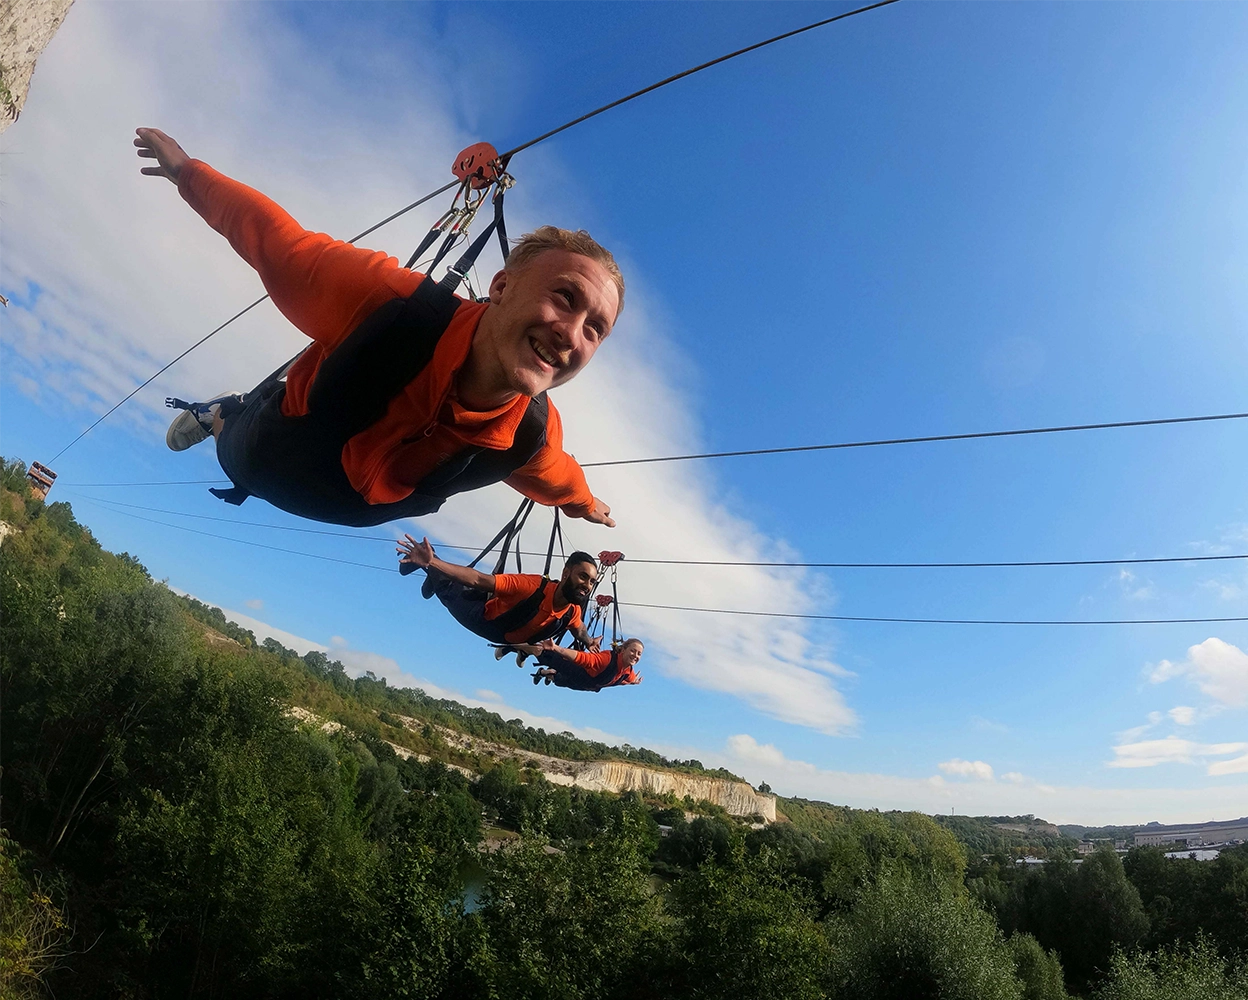 3 people of the zipline experience at hangloose Bluewater with bluewater chalk cliffs